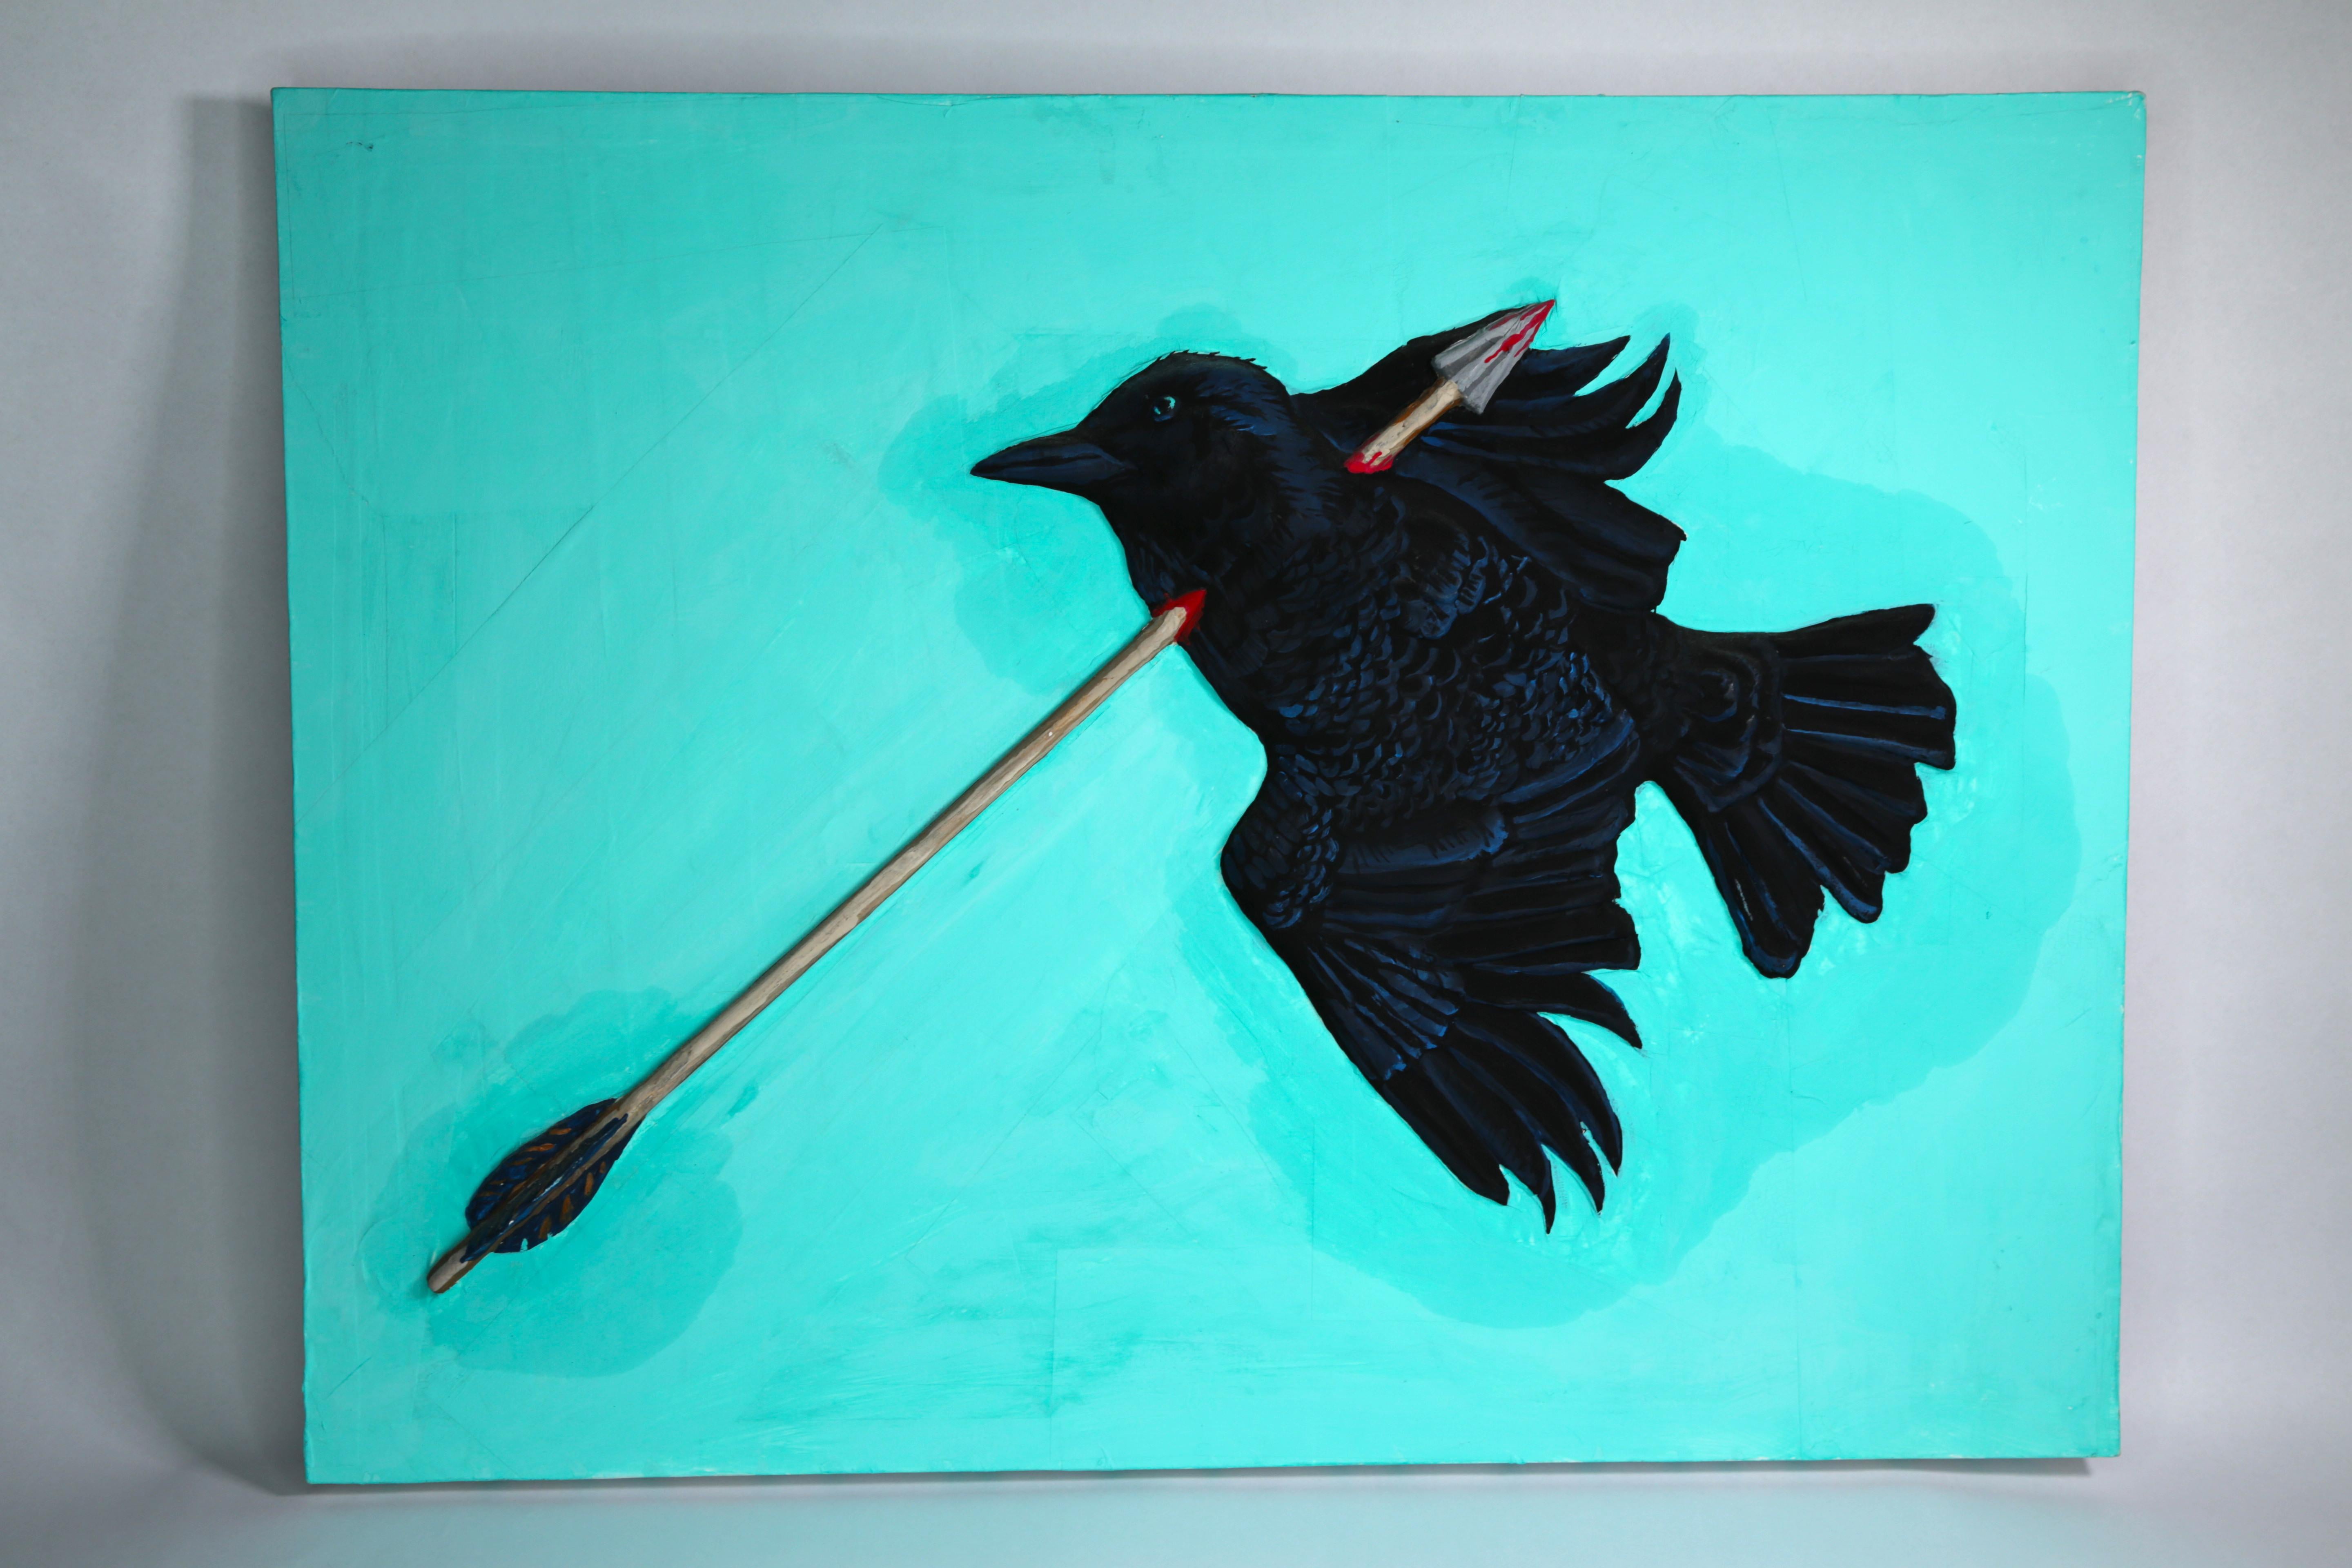 Ethan Minsker Animal Painting - Collage Painting on Canvas: 'Bird 6'